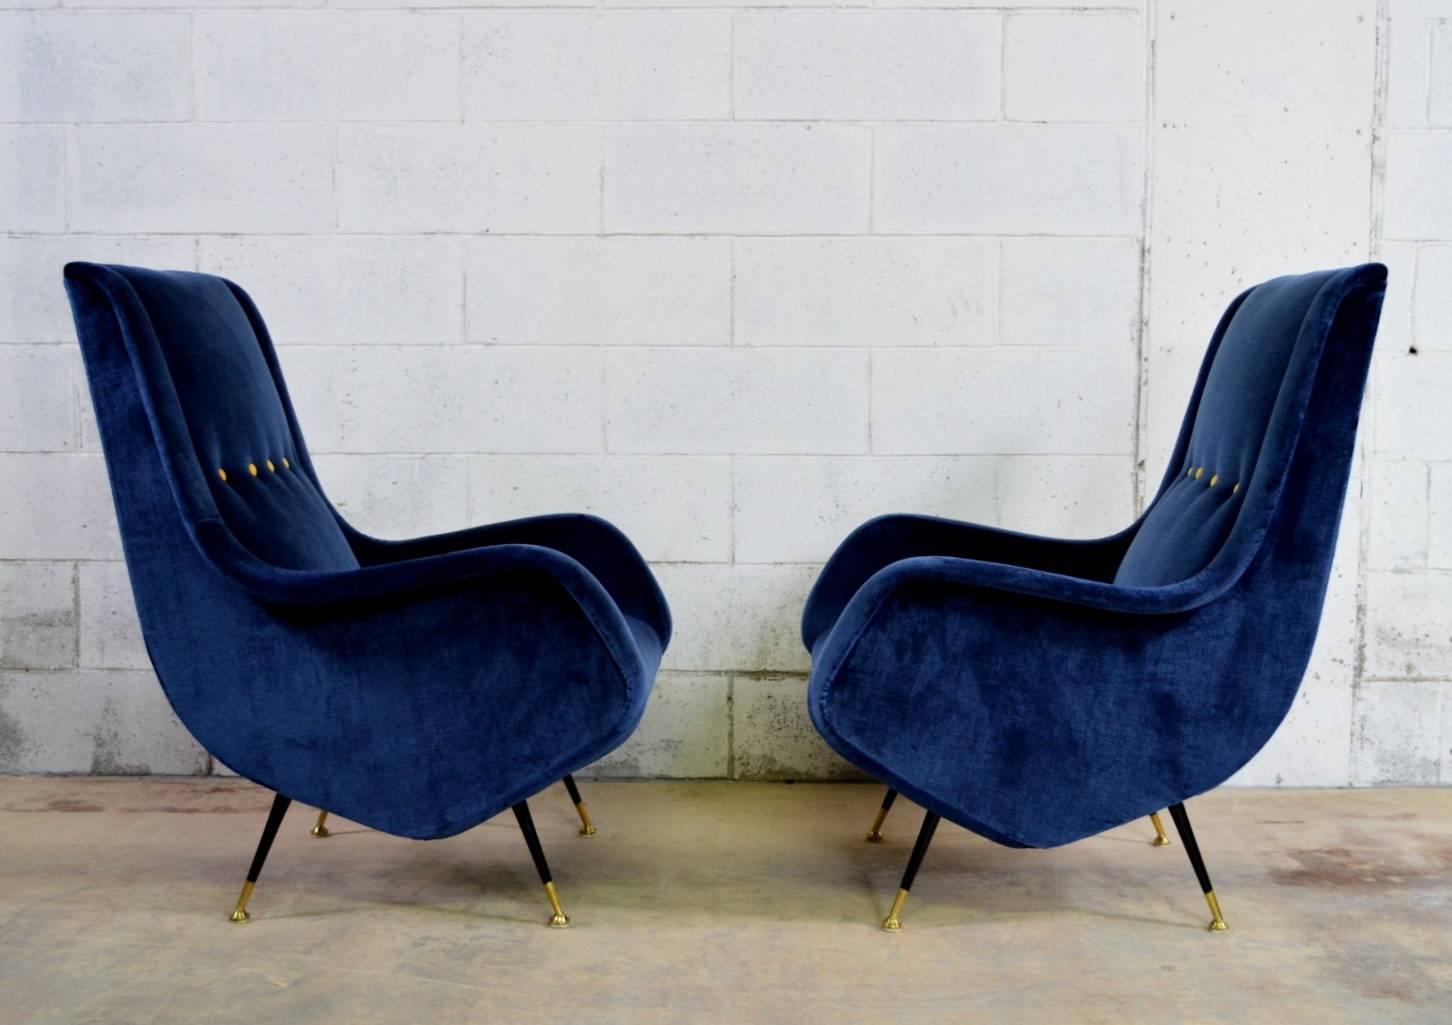 A beautiful pair of Italian armchairs or Lounge chairs designed from Aldo Morbelli and manufactured from I.S.A. Bergamo, Italy, in the 1950s.
With original Stiletto brass feet, polished and very stylish.
The armchairs have been completely